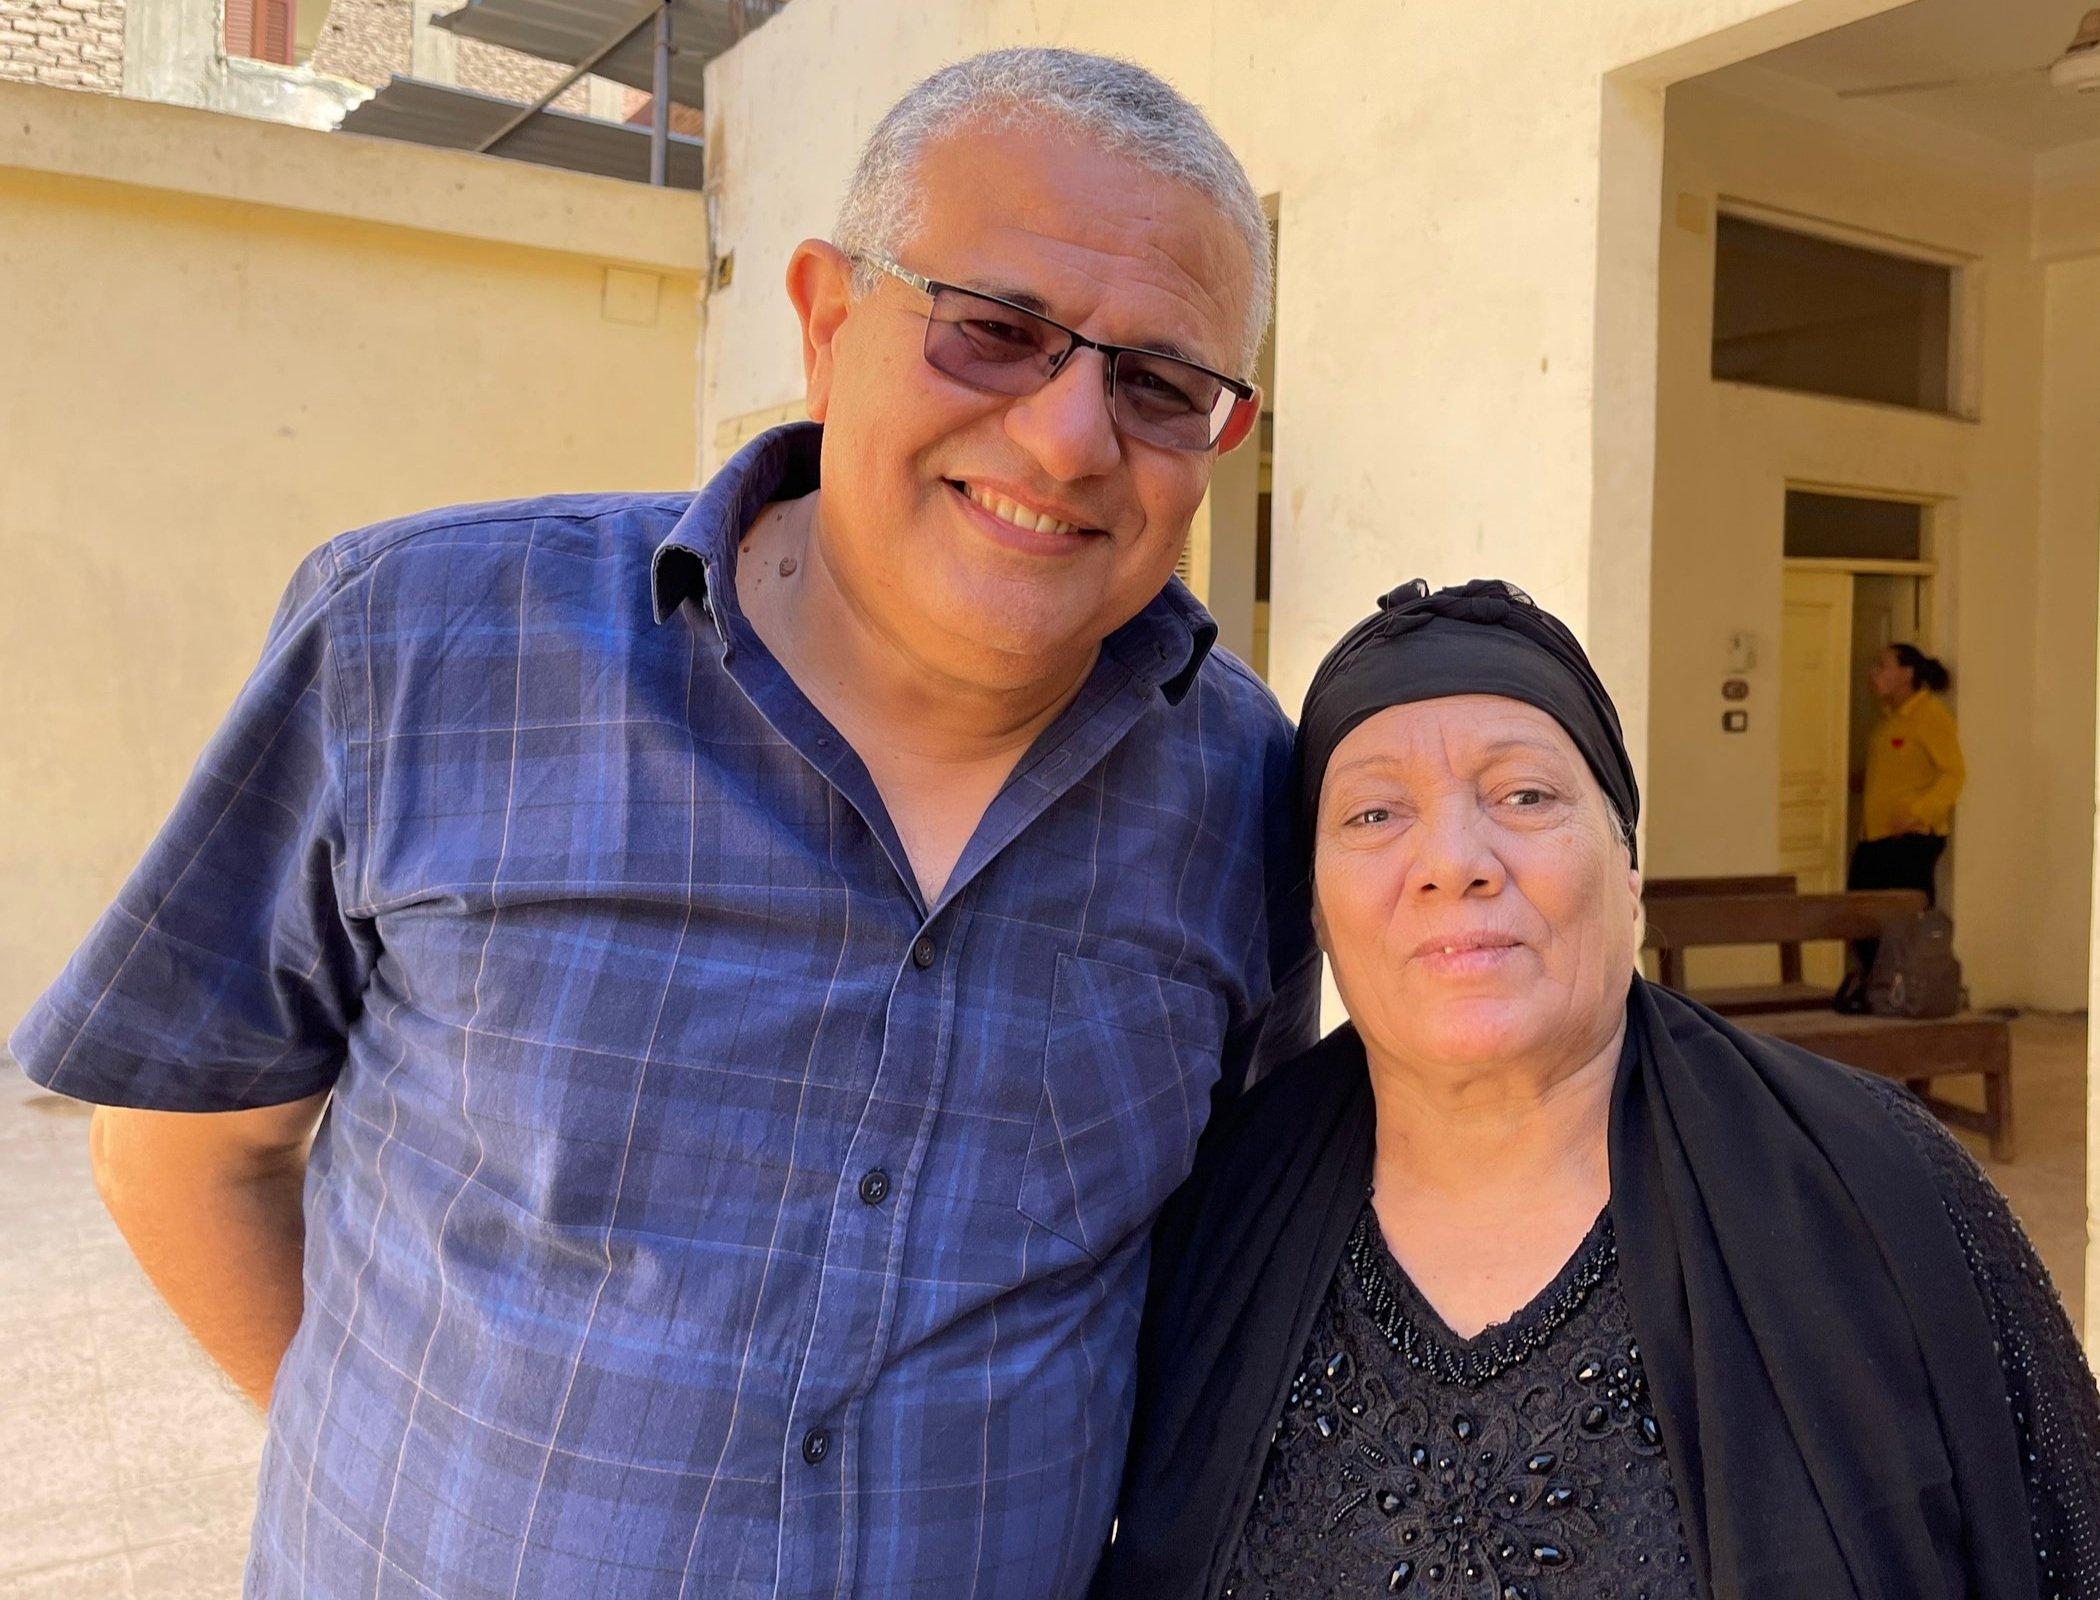  Rev. Dr. Tharwat Wahba is a mission consultant for The Outreach Foundation, Chair of Mission at the Evangelical Theological Seminary in Cairo and sits on the Synod of the Nile’s Pastoral Outreach and Mission Committee which guides our new church dev